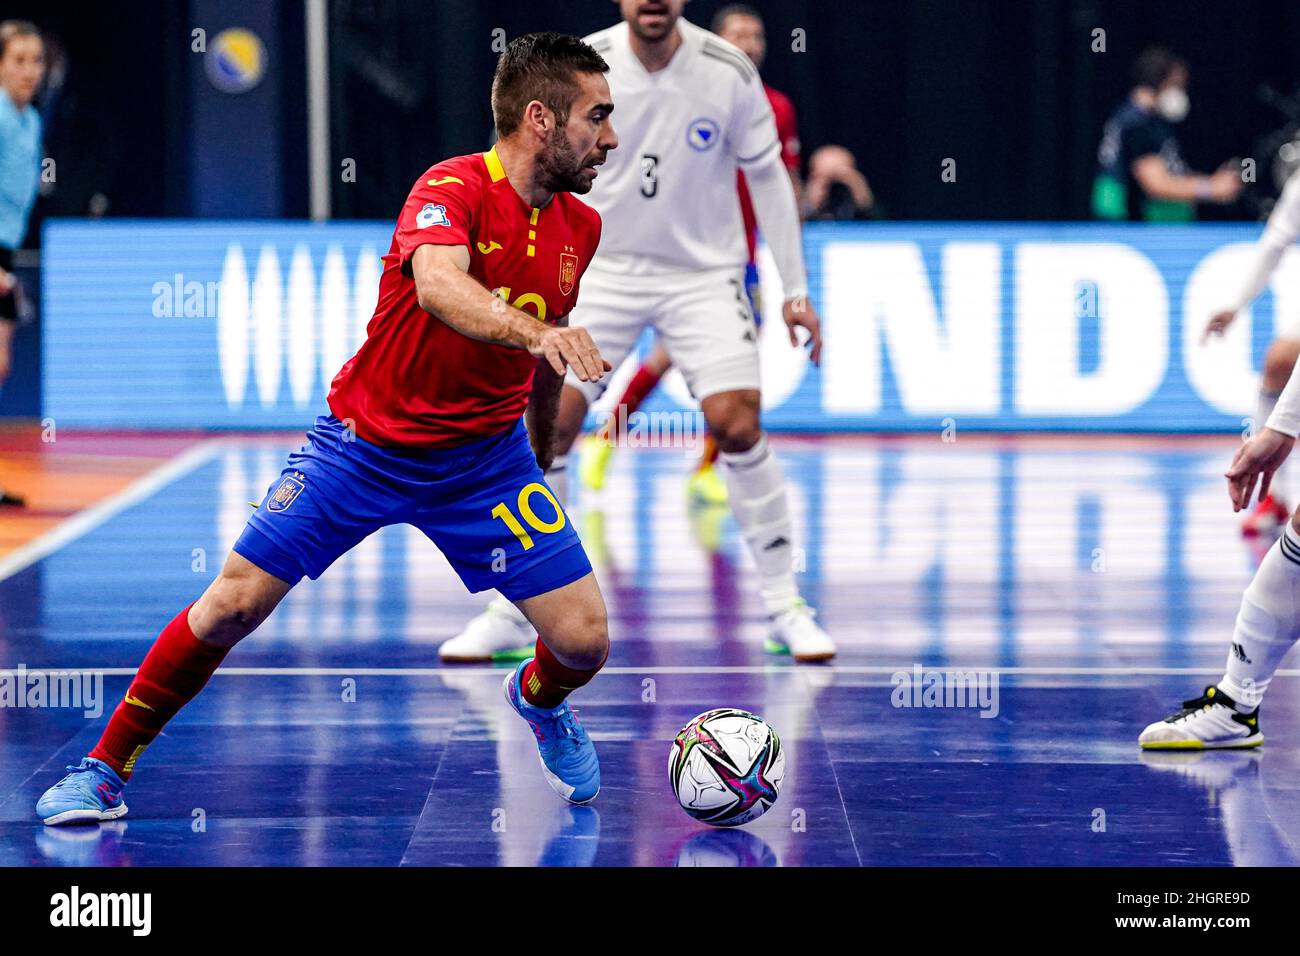 GRONINGEN, NETHERLANDS - JANUARY 22: Cecilio Morales of Spain during the Men's Futsal Euro 2022 Group D match between Spain and the Bosnia and Herzegovina at the Martiniplaza on January 22, 2022 in Groningen, Netherlands (Photo by Andre Weening/Orange Pictures) Stock Photo